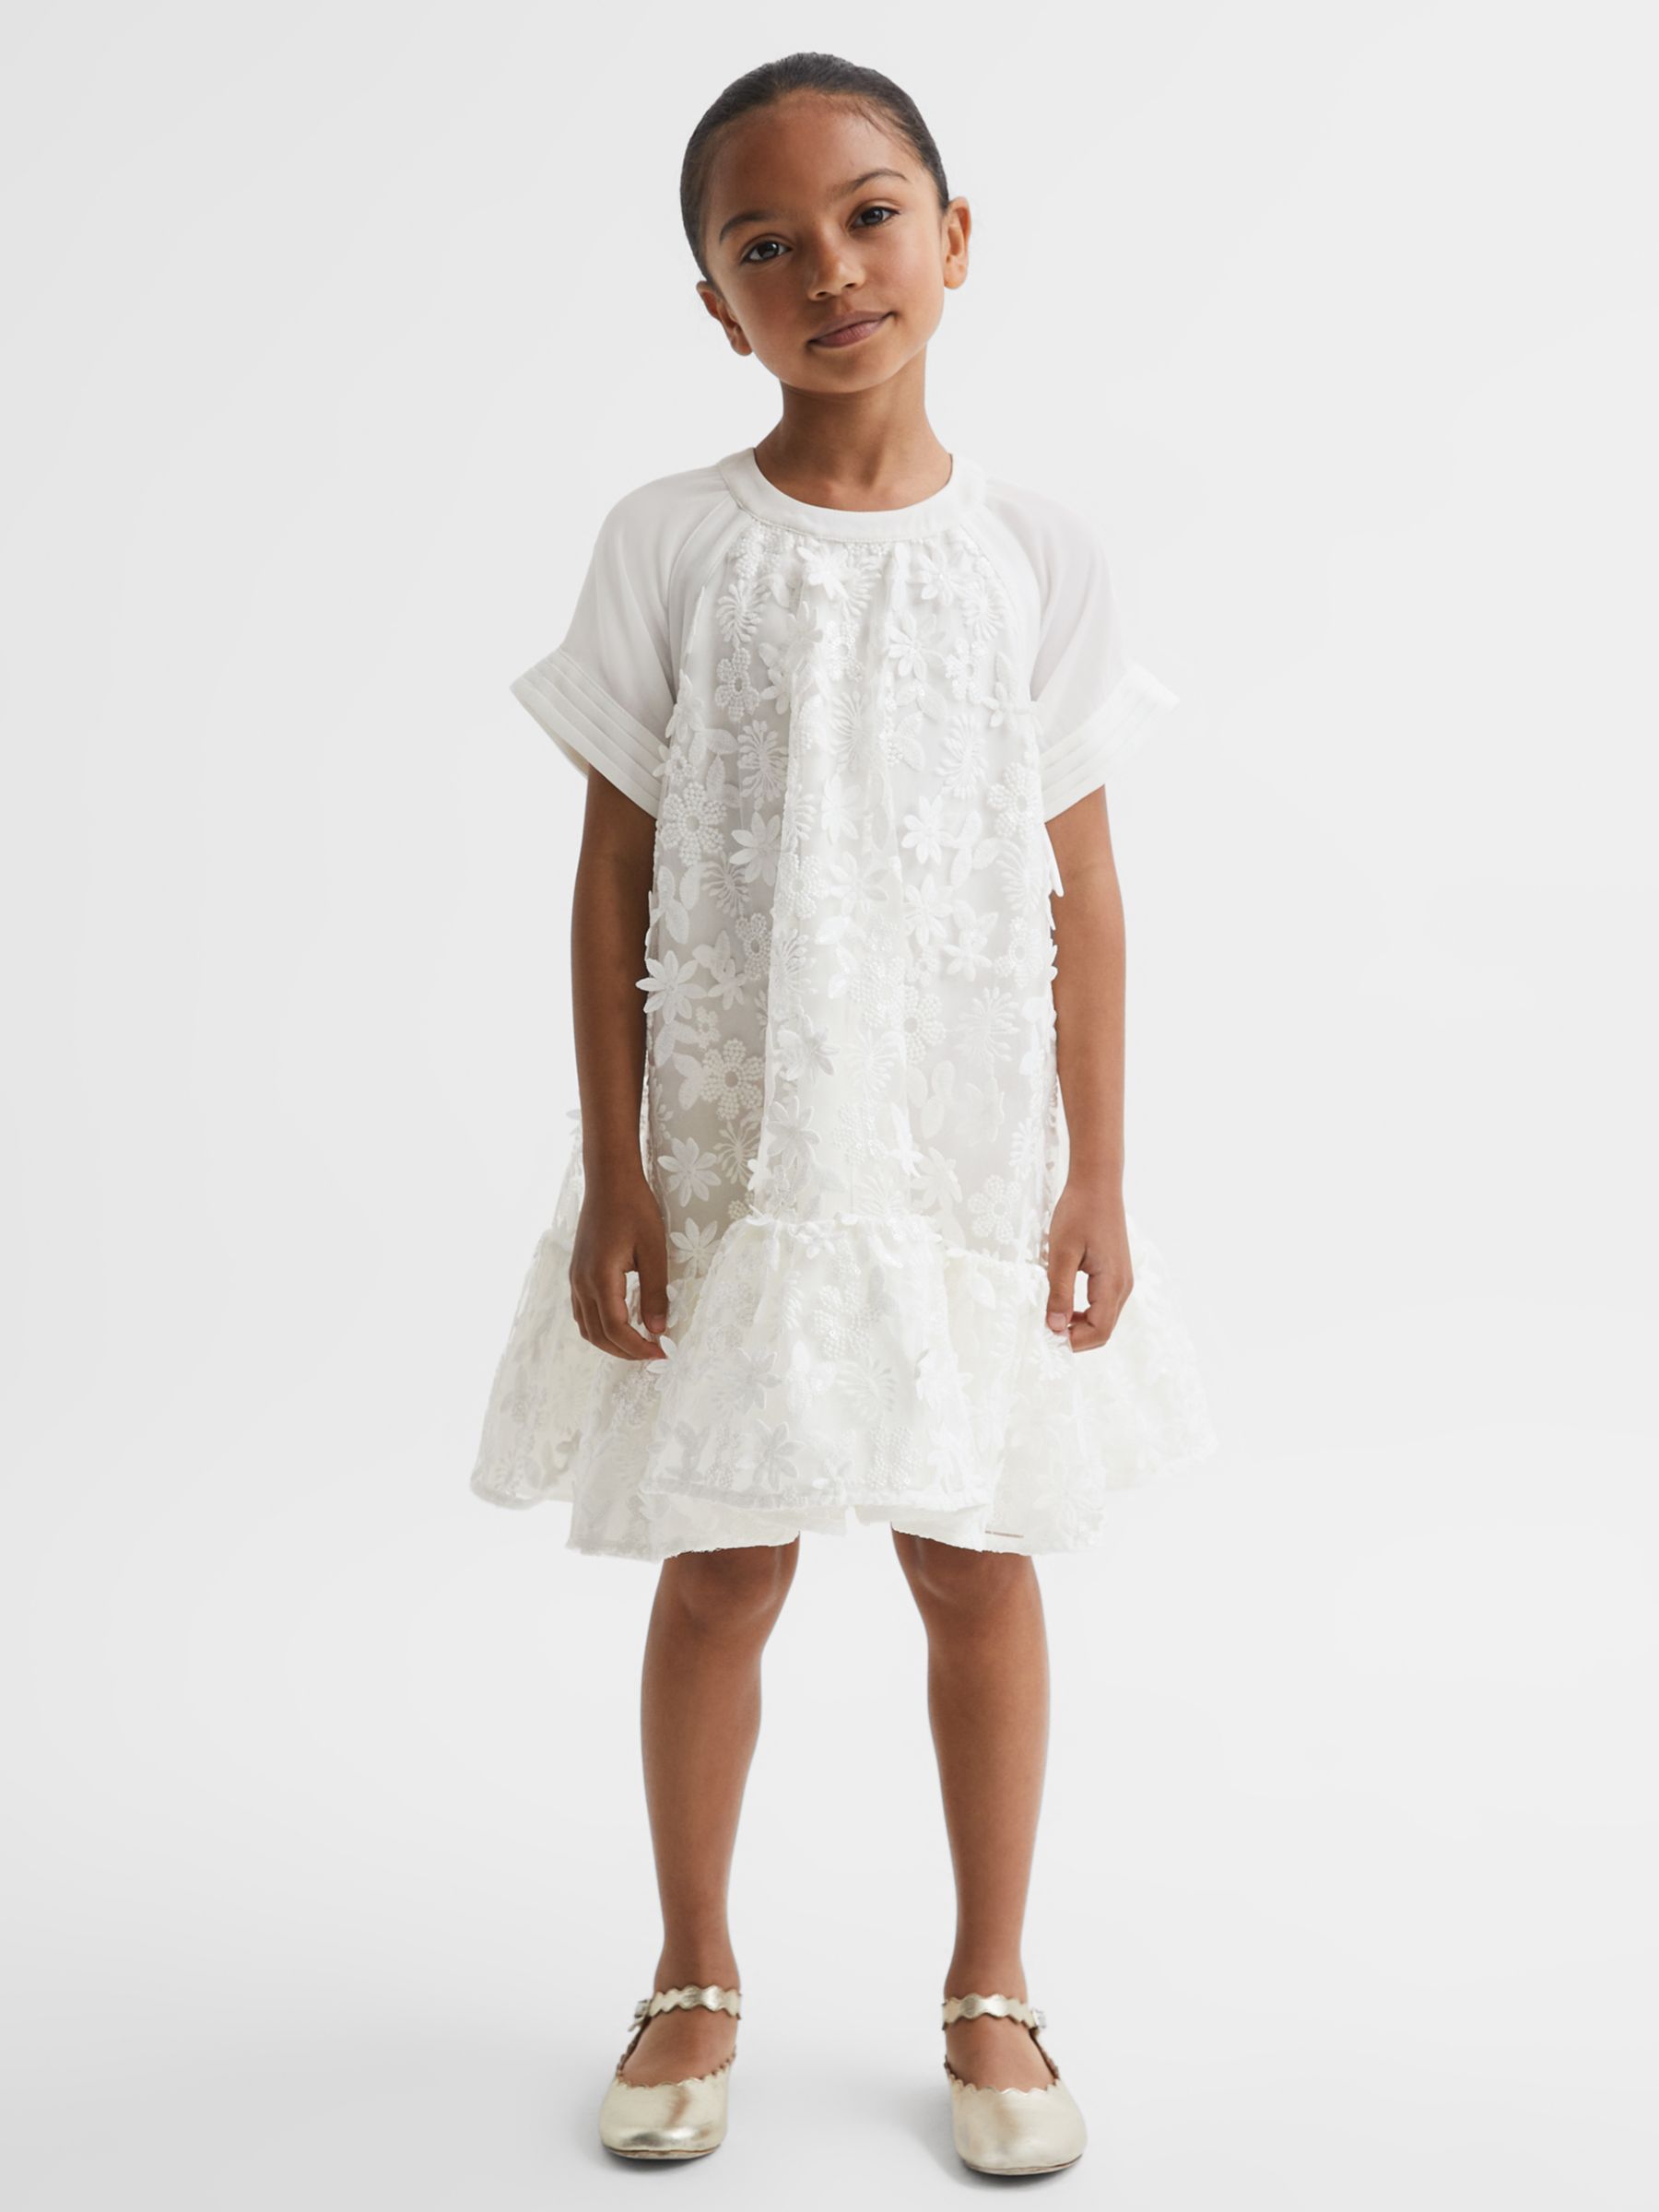 Reiss Kids' Theo Floral Lace Dress, Ivory, 9-10 years